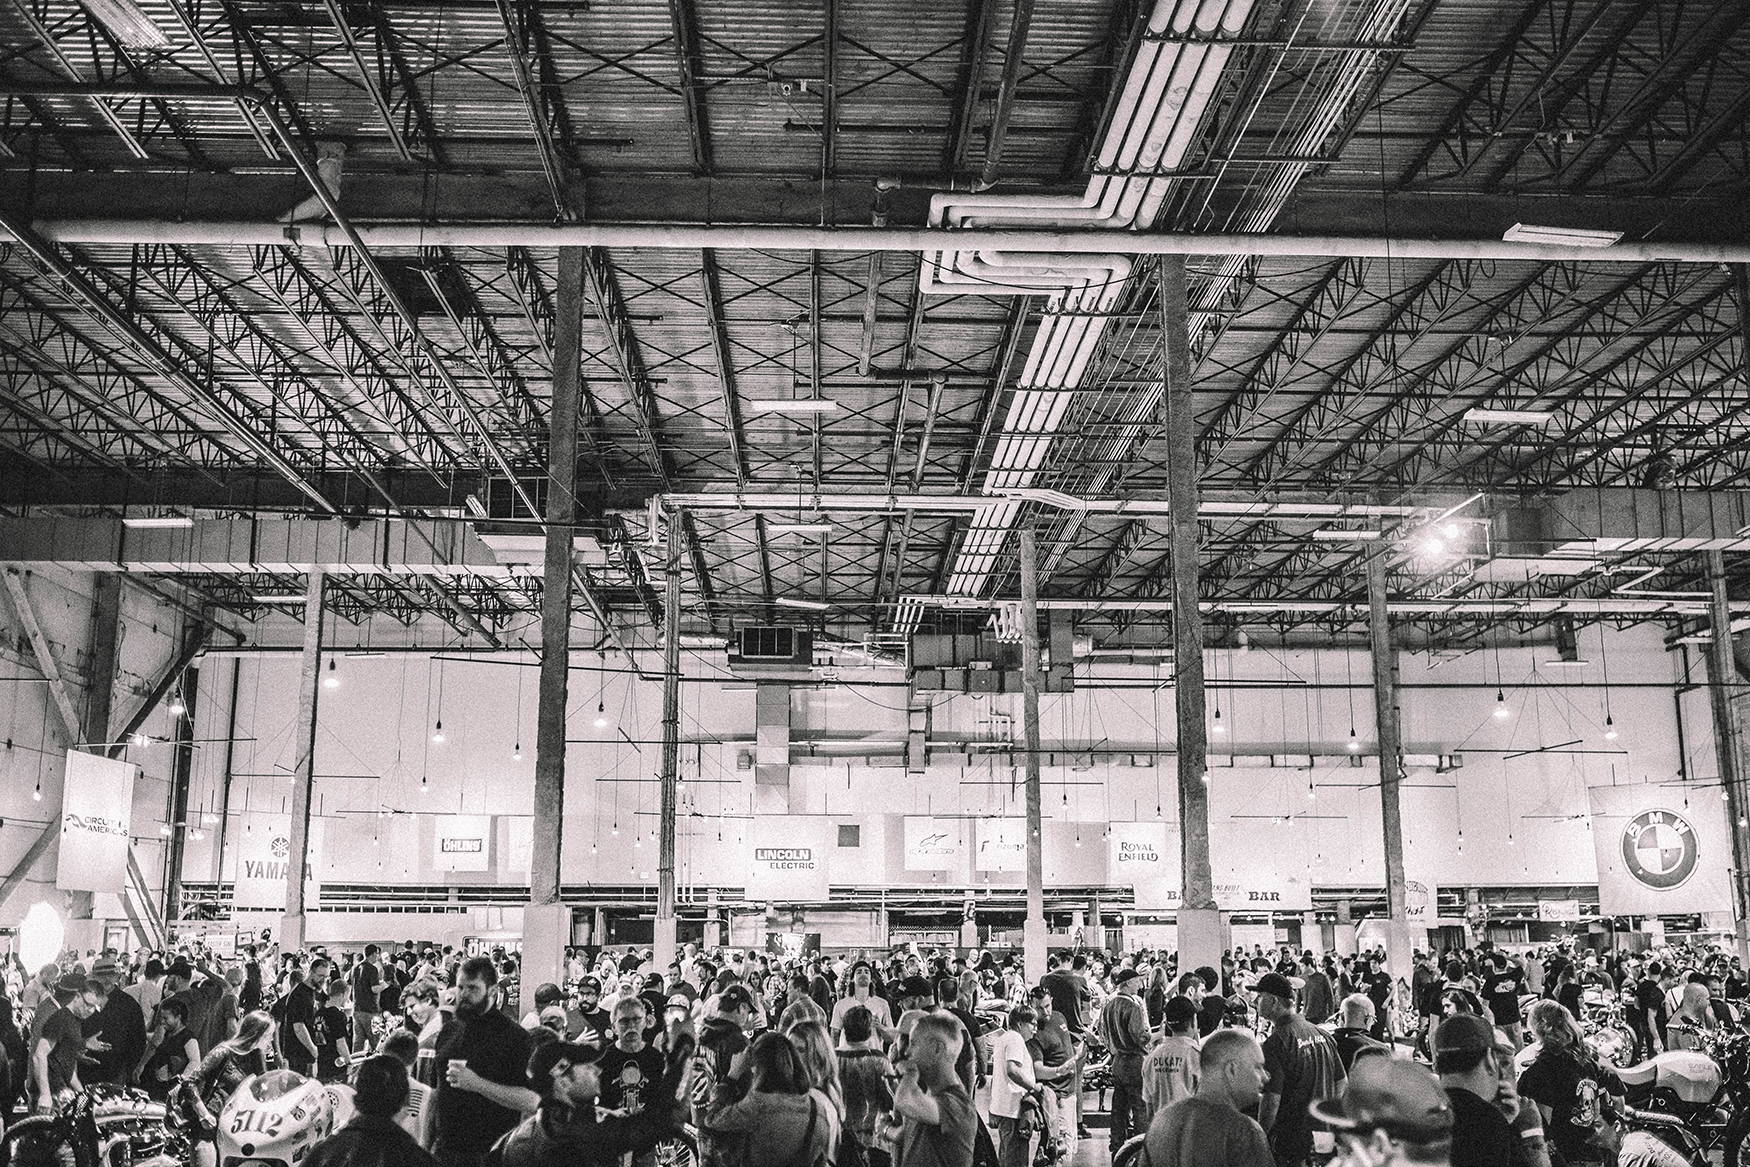 A photo in black and white of the crowd at the Handbuilt Motorcycle Show